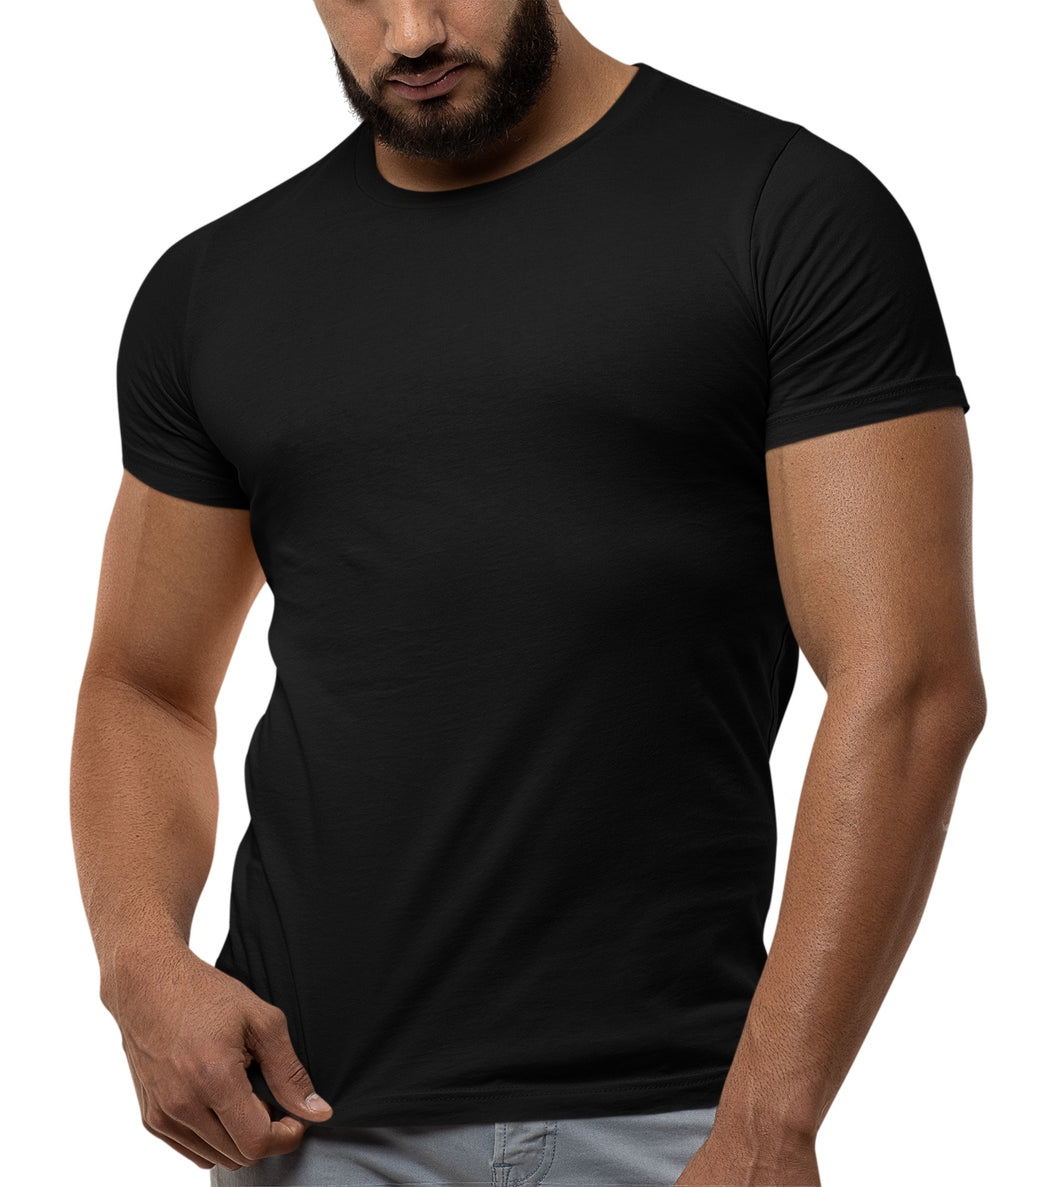 Wholesale -Blank Tees - Modern Fitted Premium Ultra Soft 95/5 Cotton Blend Tee